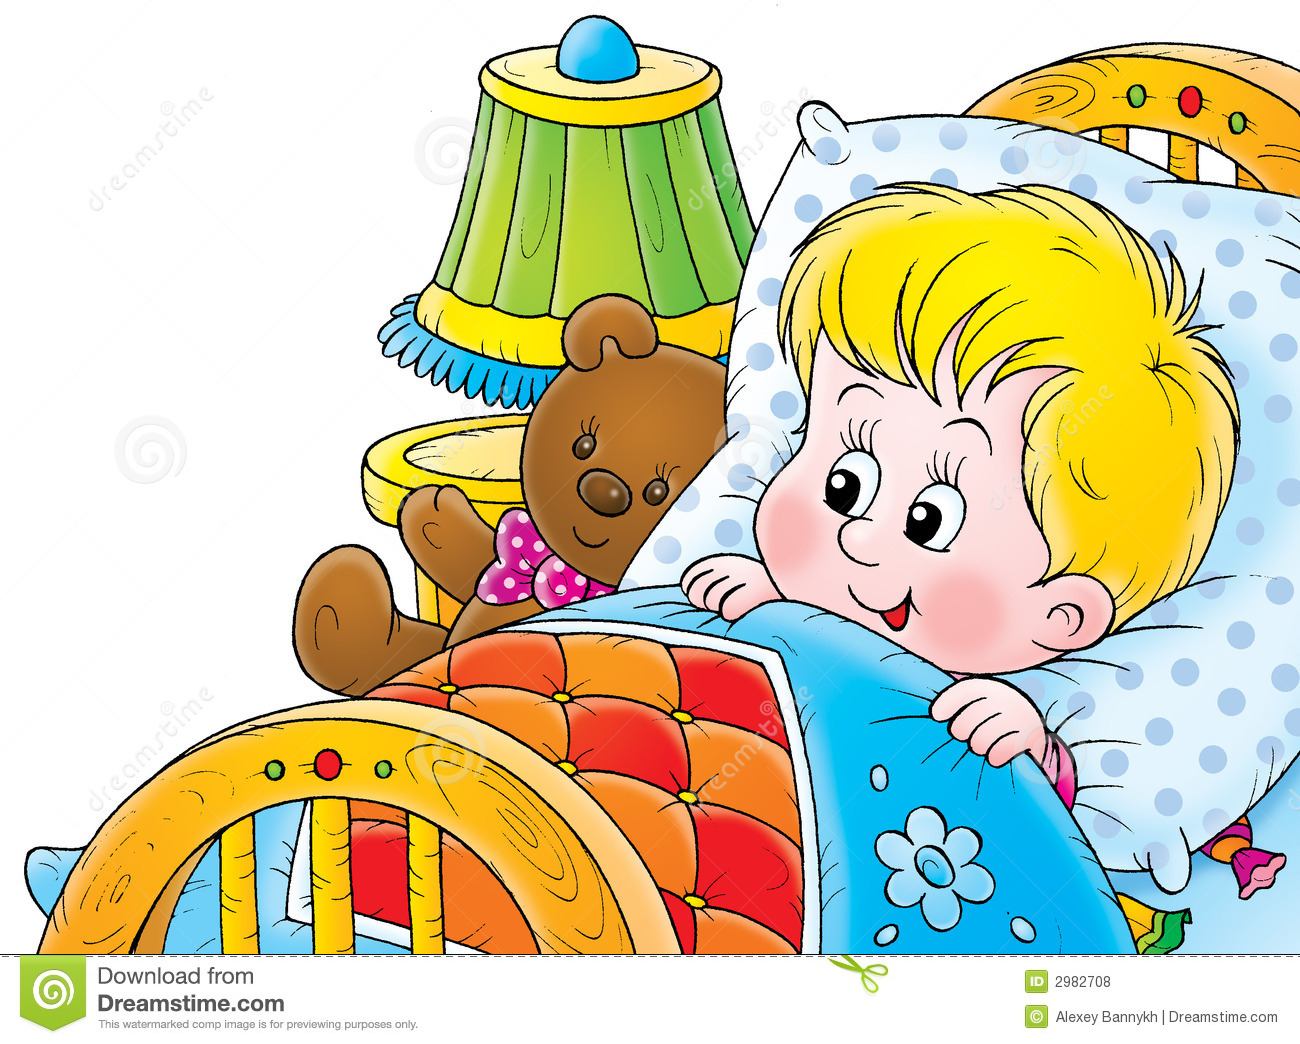 Child waking up in the morning clipart.